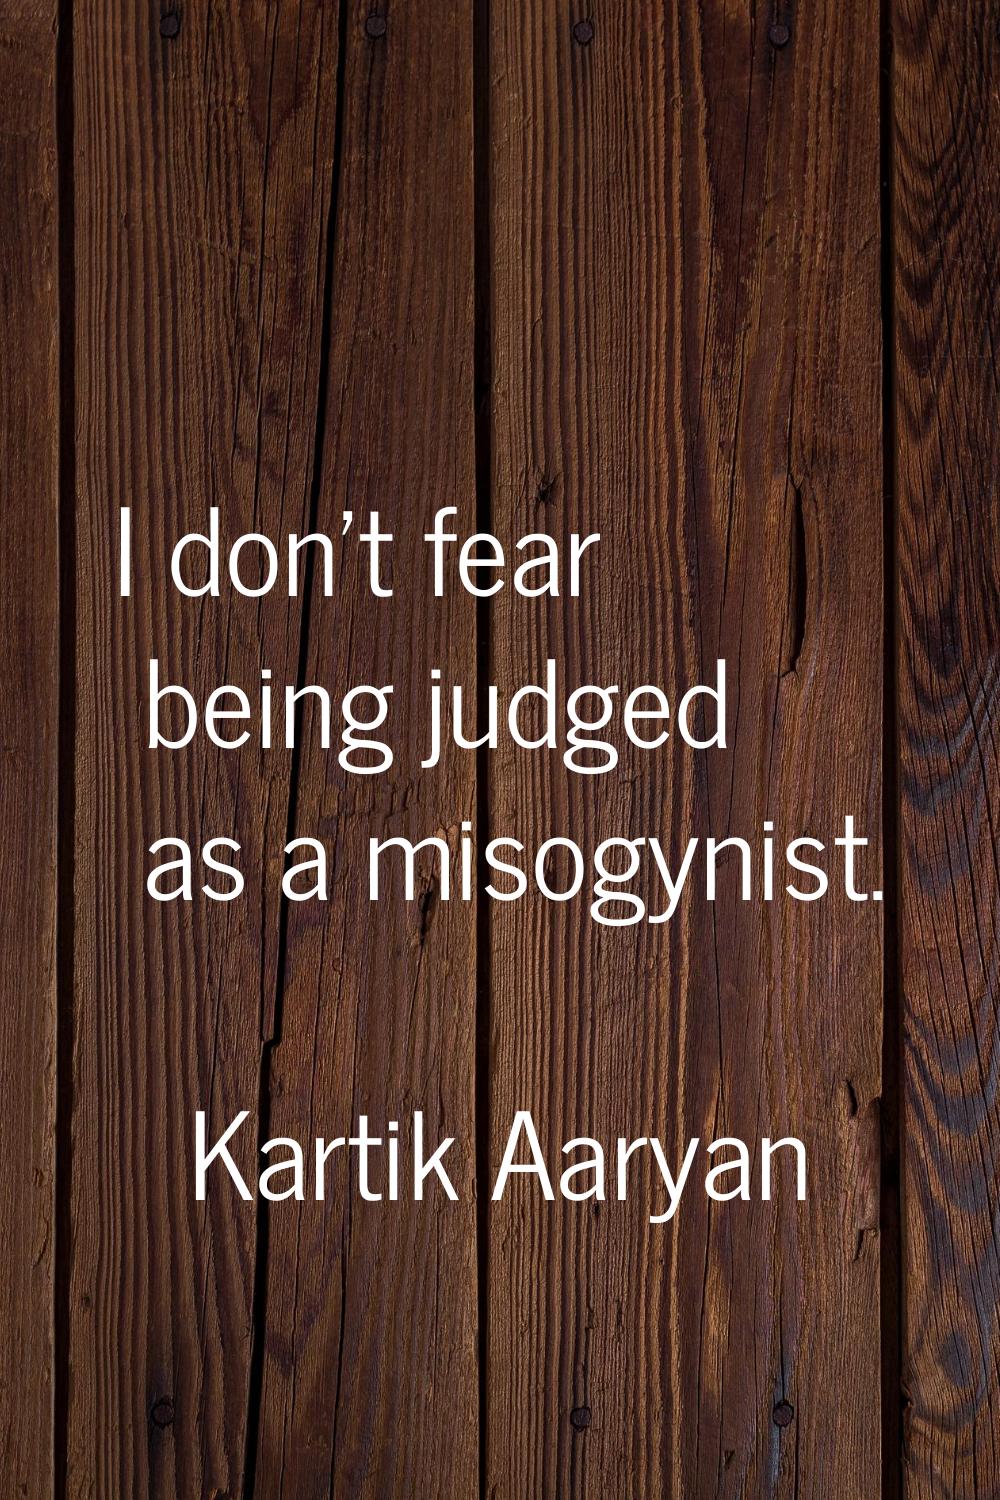 I don't fear being judged as a misogynist.